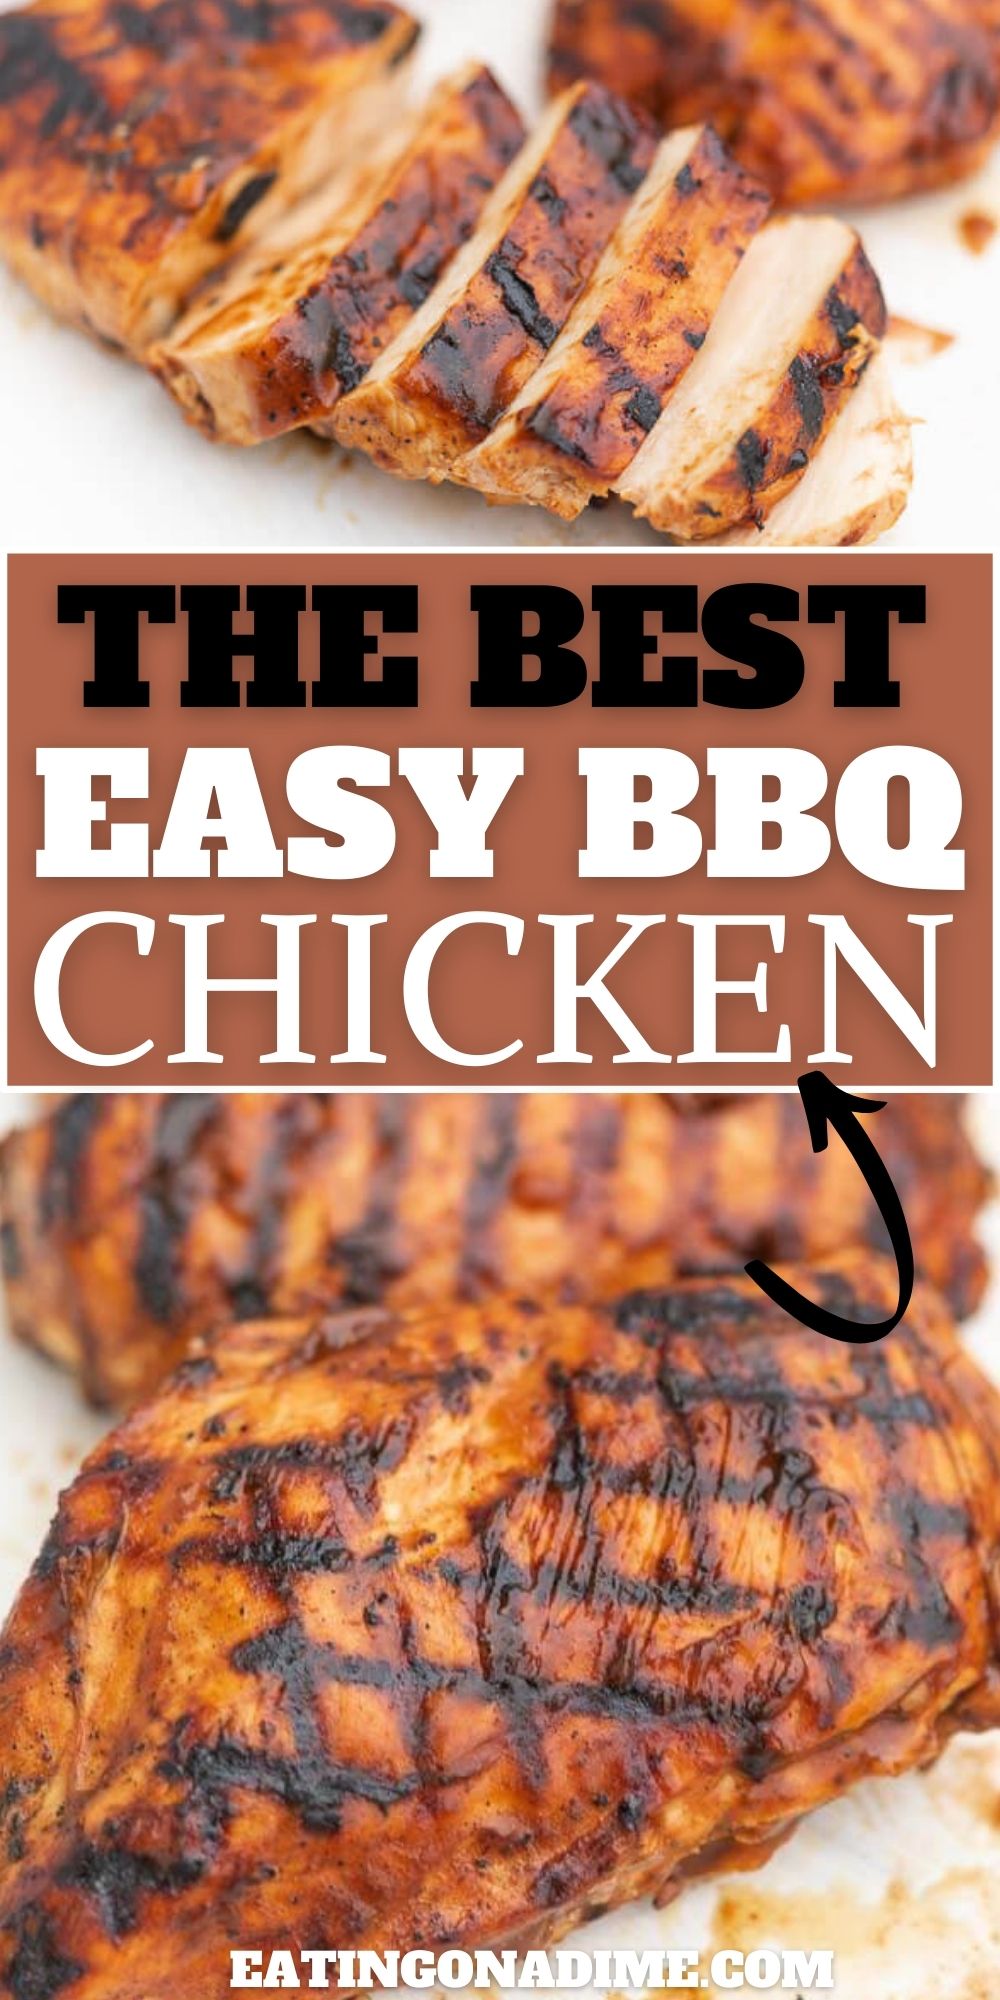 This is the best BBQ Chicken recipe that is made on the grill with an easy 2 ingredient marinade. This is the best ever bbq chicken breast marinade for the grill. You will love making this recipe this Spring and Summer! #eatingonadime #grillingrecipes #bbqrecipes #chickenrecipes 